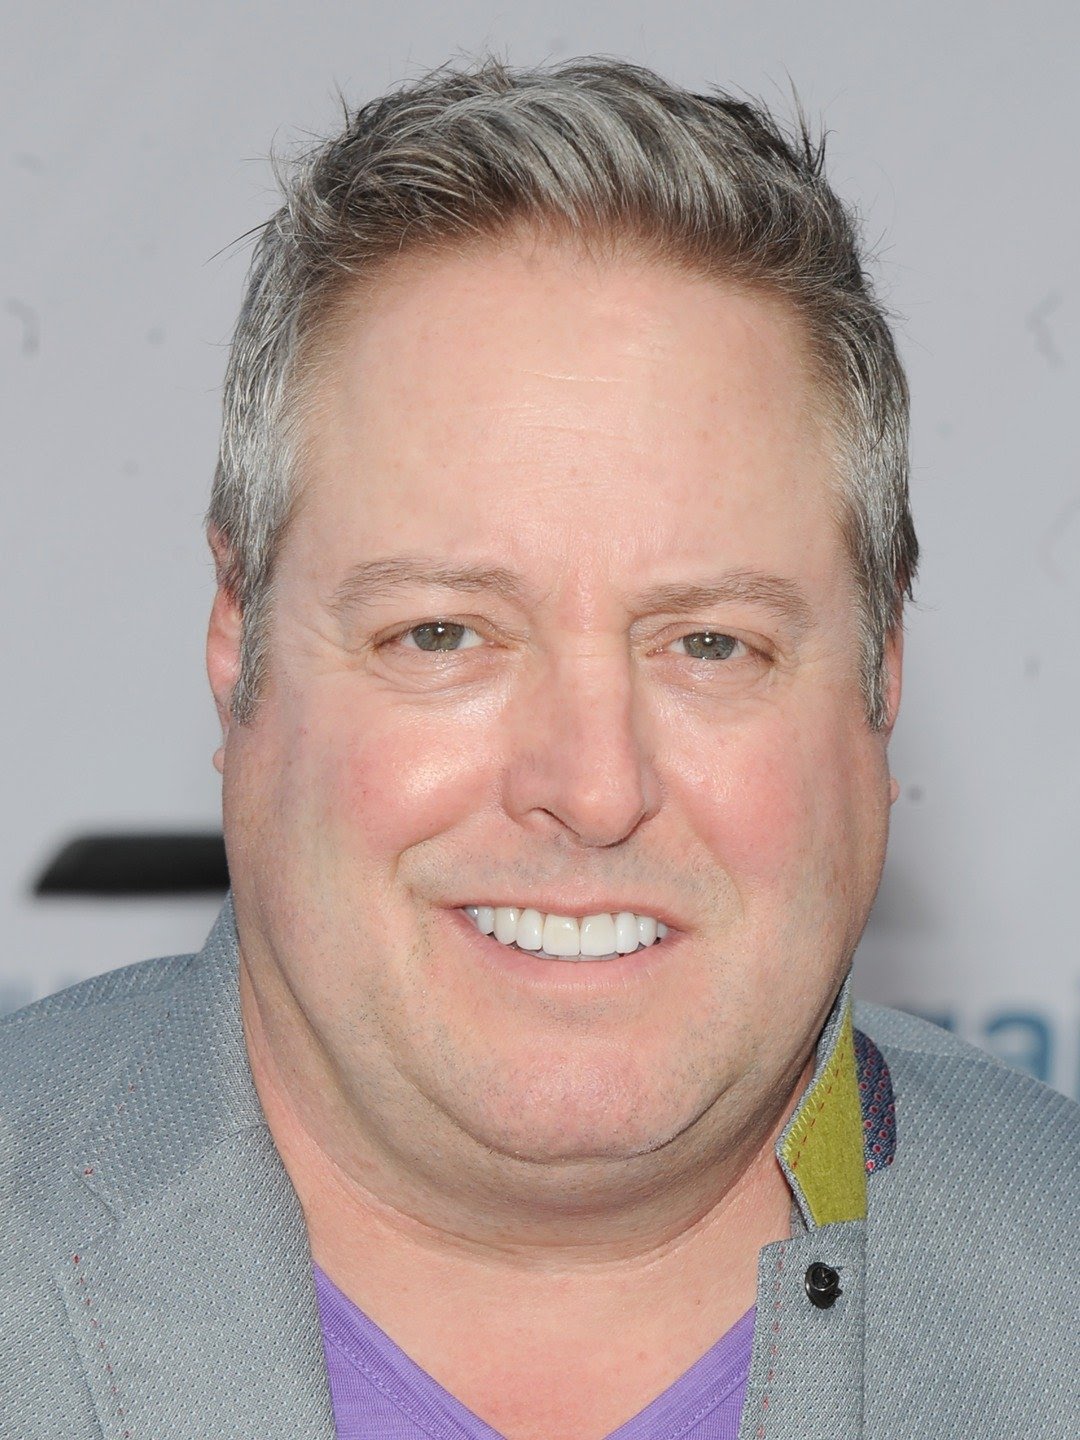 About Gary Valentine Real Name, Age, Brother, Wife, Net Worth